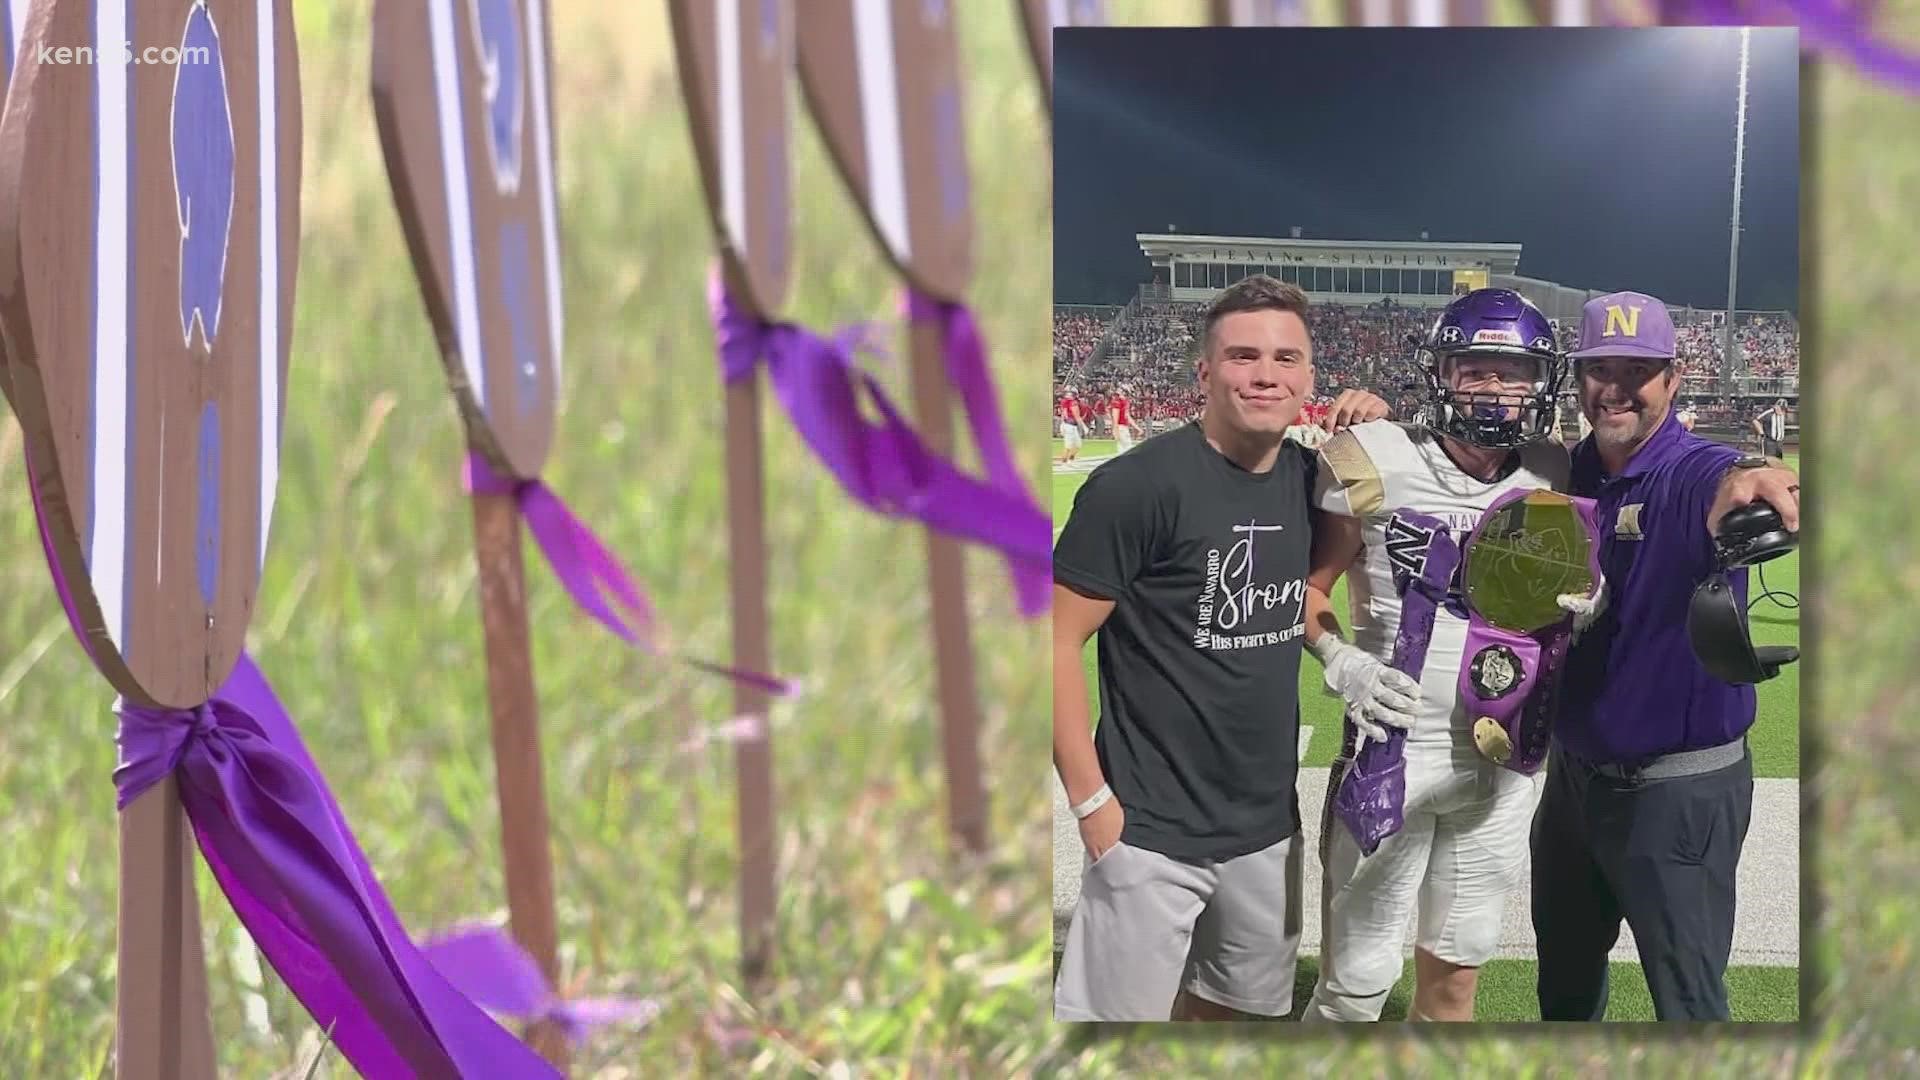 Triston Cervantes, who plays football for Navarro High, was still hurting from a game a month earlier when he sustained a concussion at practice.